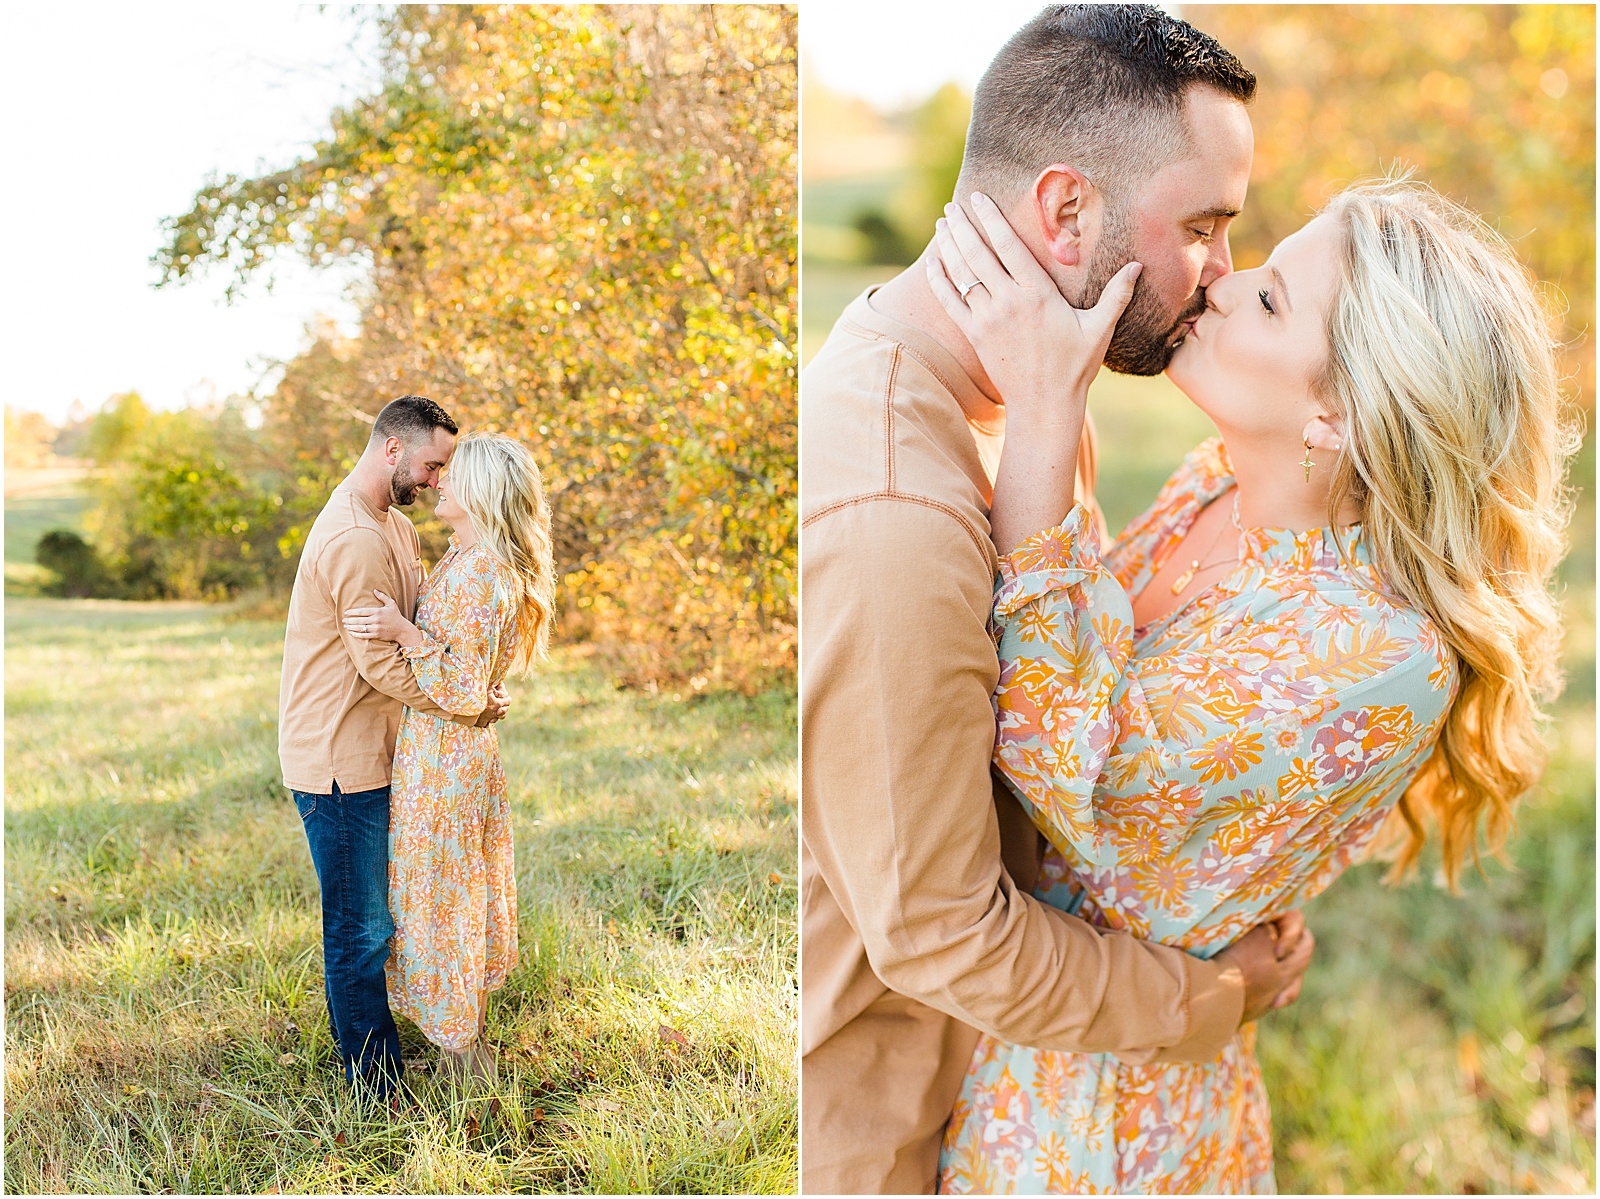 A Southern Indiana Engagement Session | Charleston and Erin | Bret and Brandie Photography004.jpg